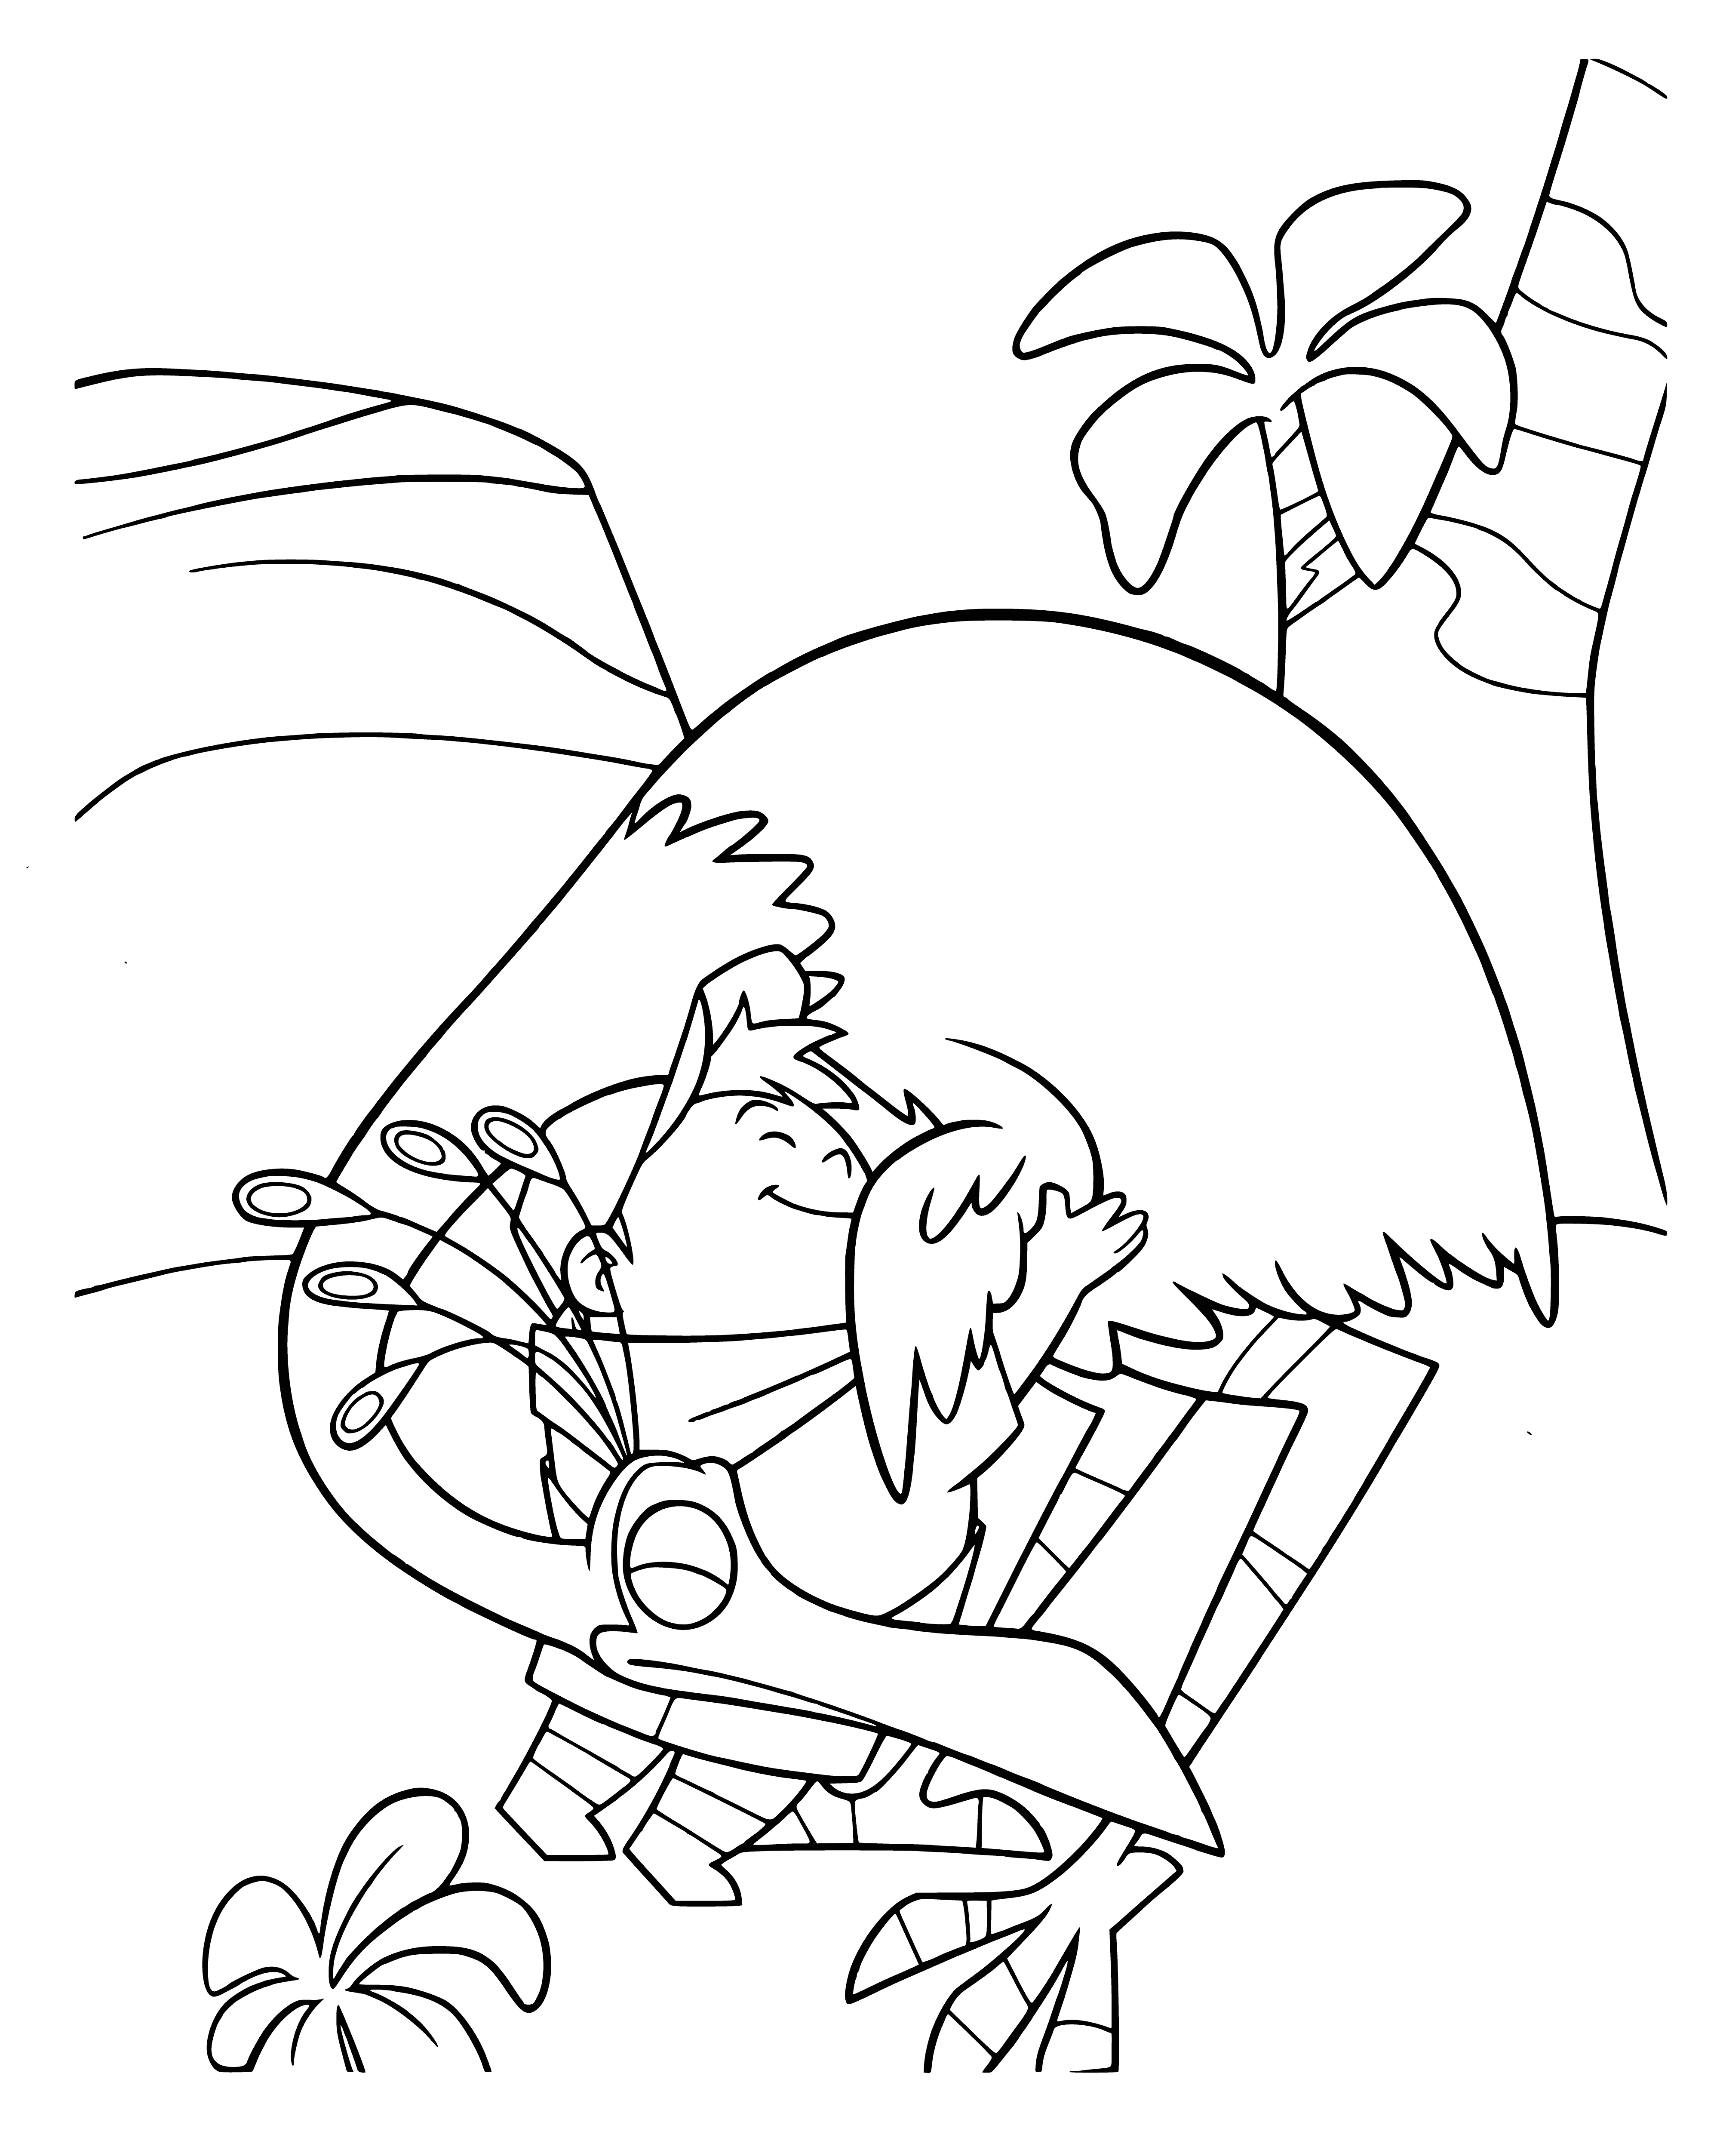 Russell and the bird coloring page